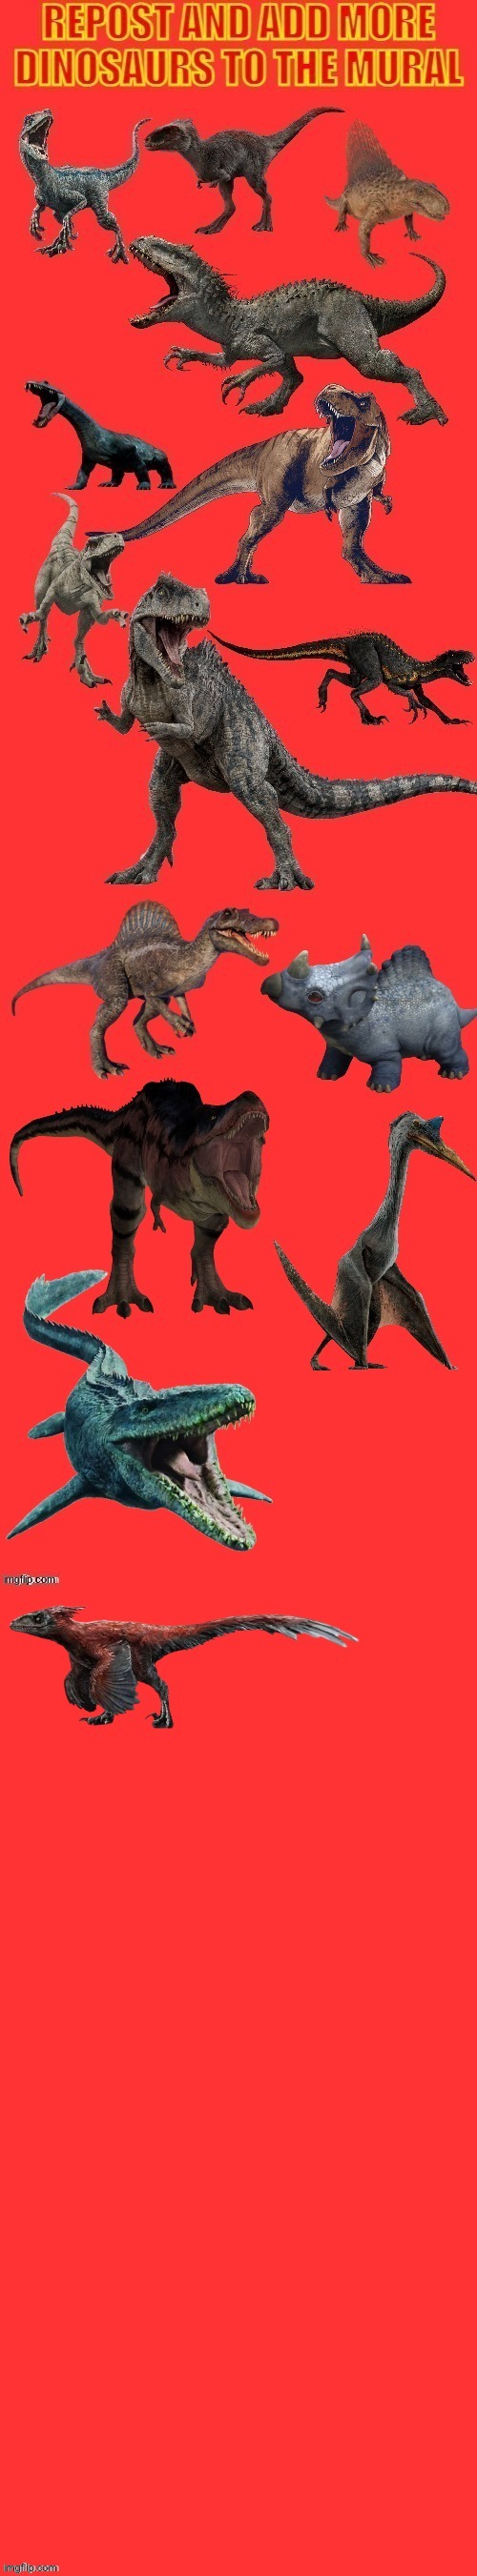 Repost and add more dinosaurs to the mural | image tagged in jurassic park,pyroraptor | made w/ Imgflip meme maker